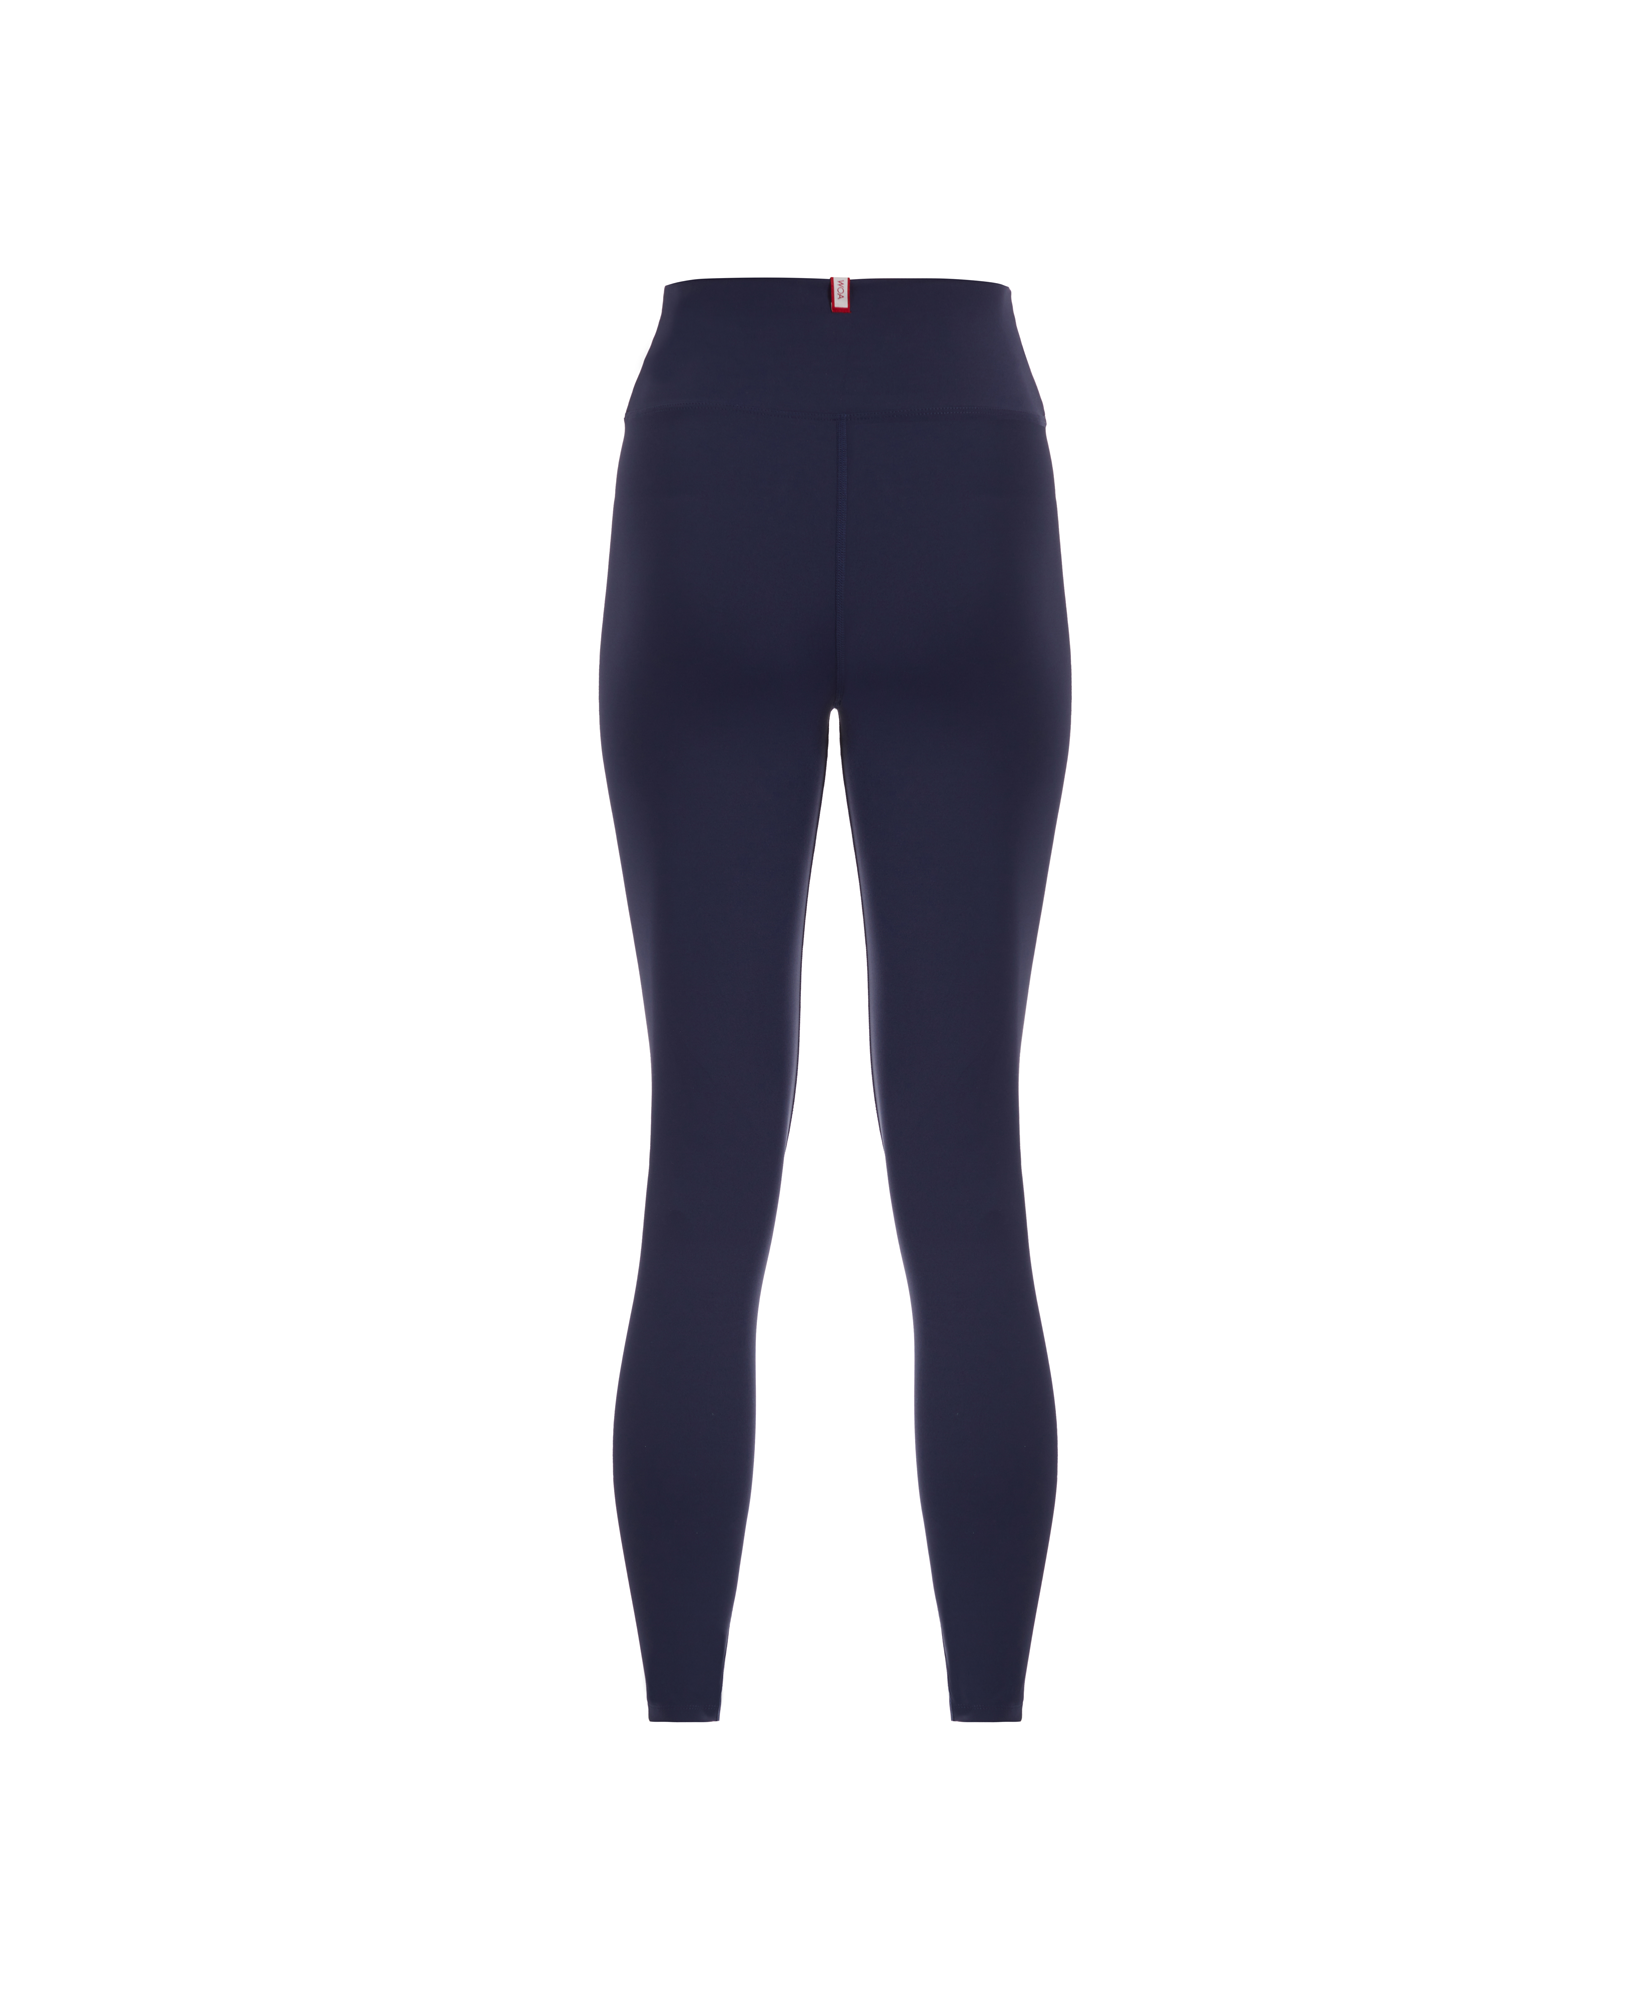 Routine Legging in Navy Nimbus Fabric with 4-Way Stretch – Wear